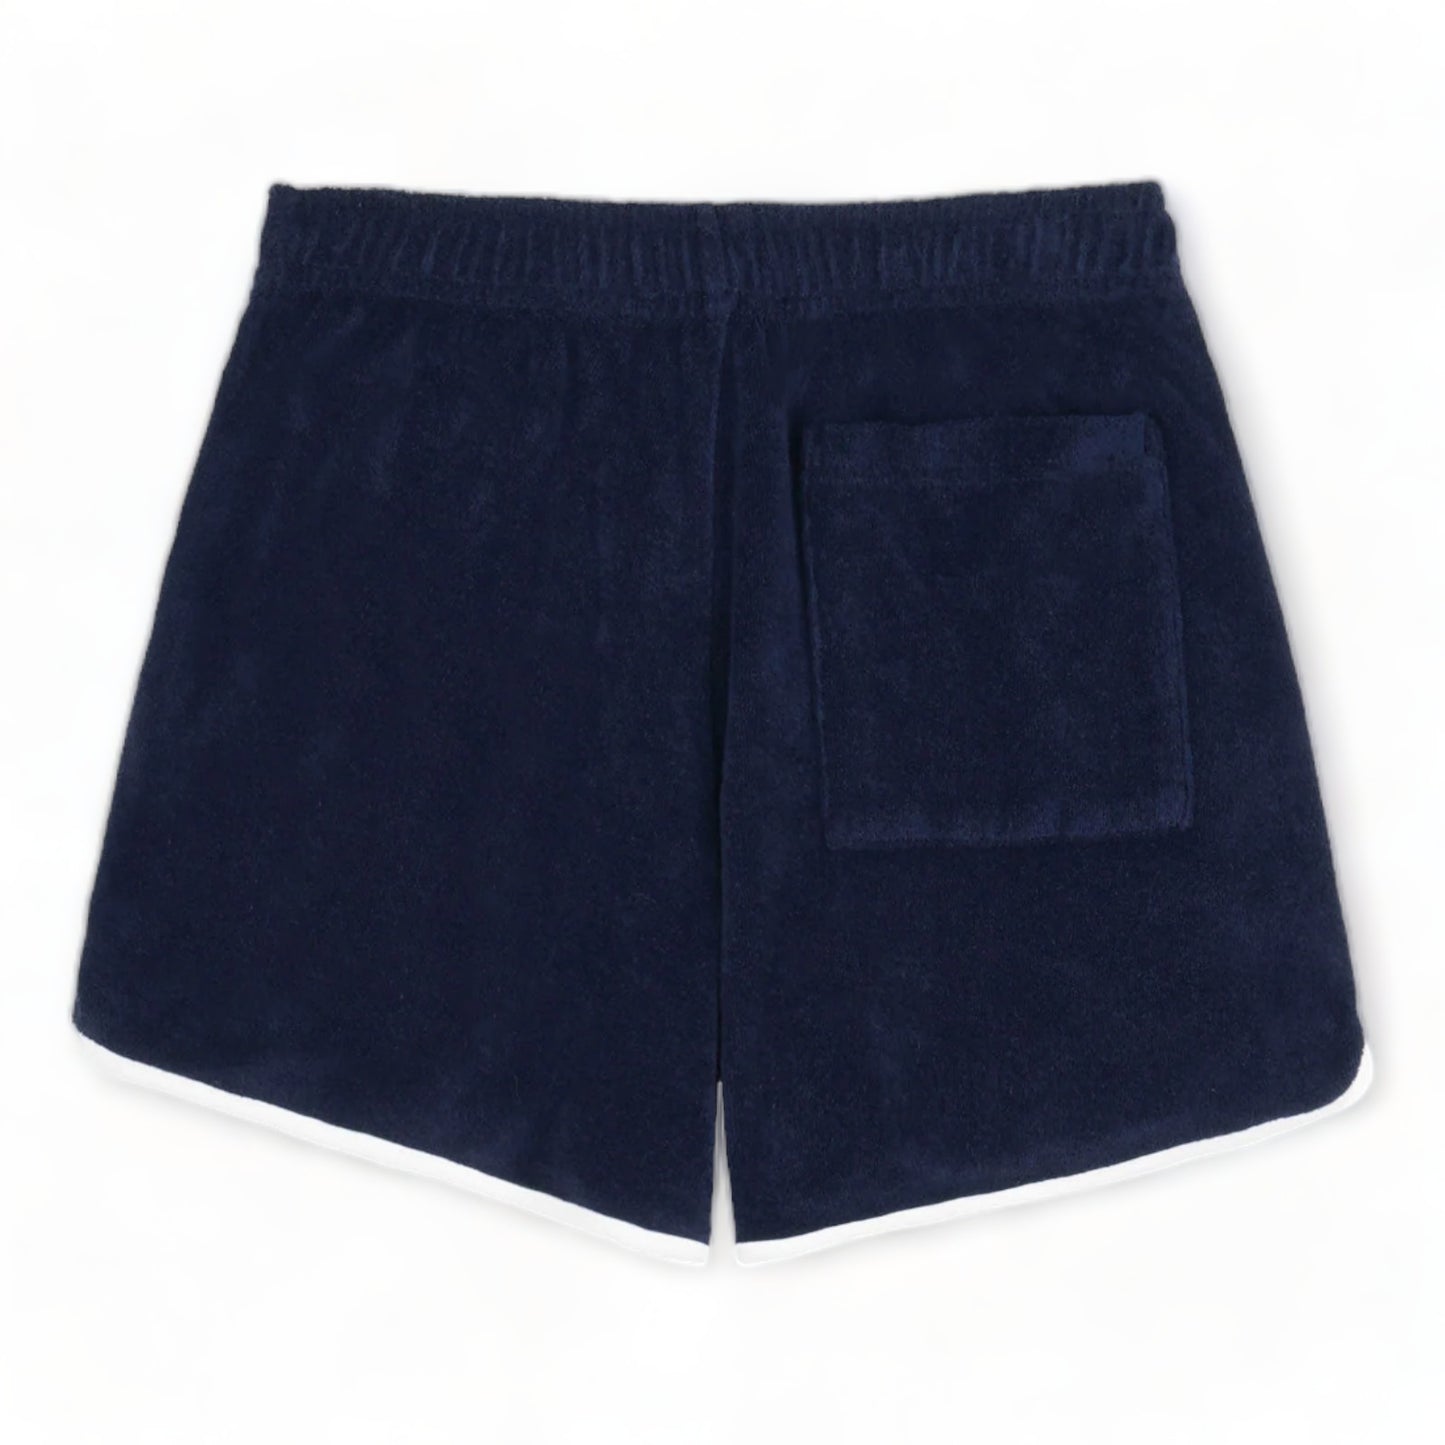 SPORTY & RICH X PRINCE SPORTY TERRY SHORTS